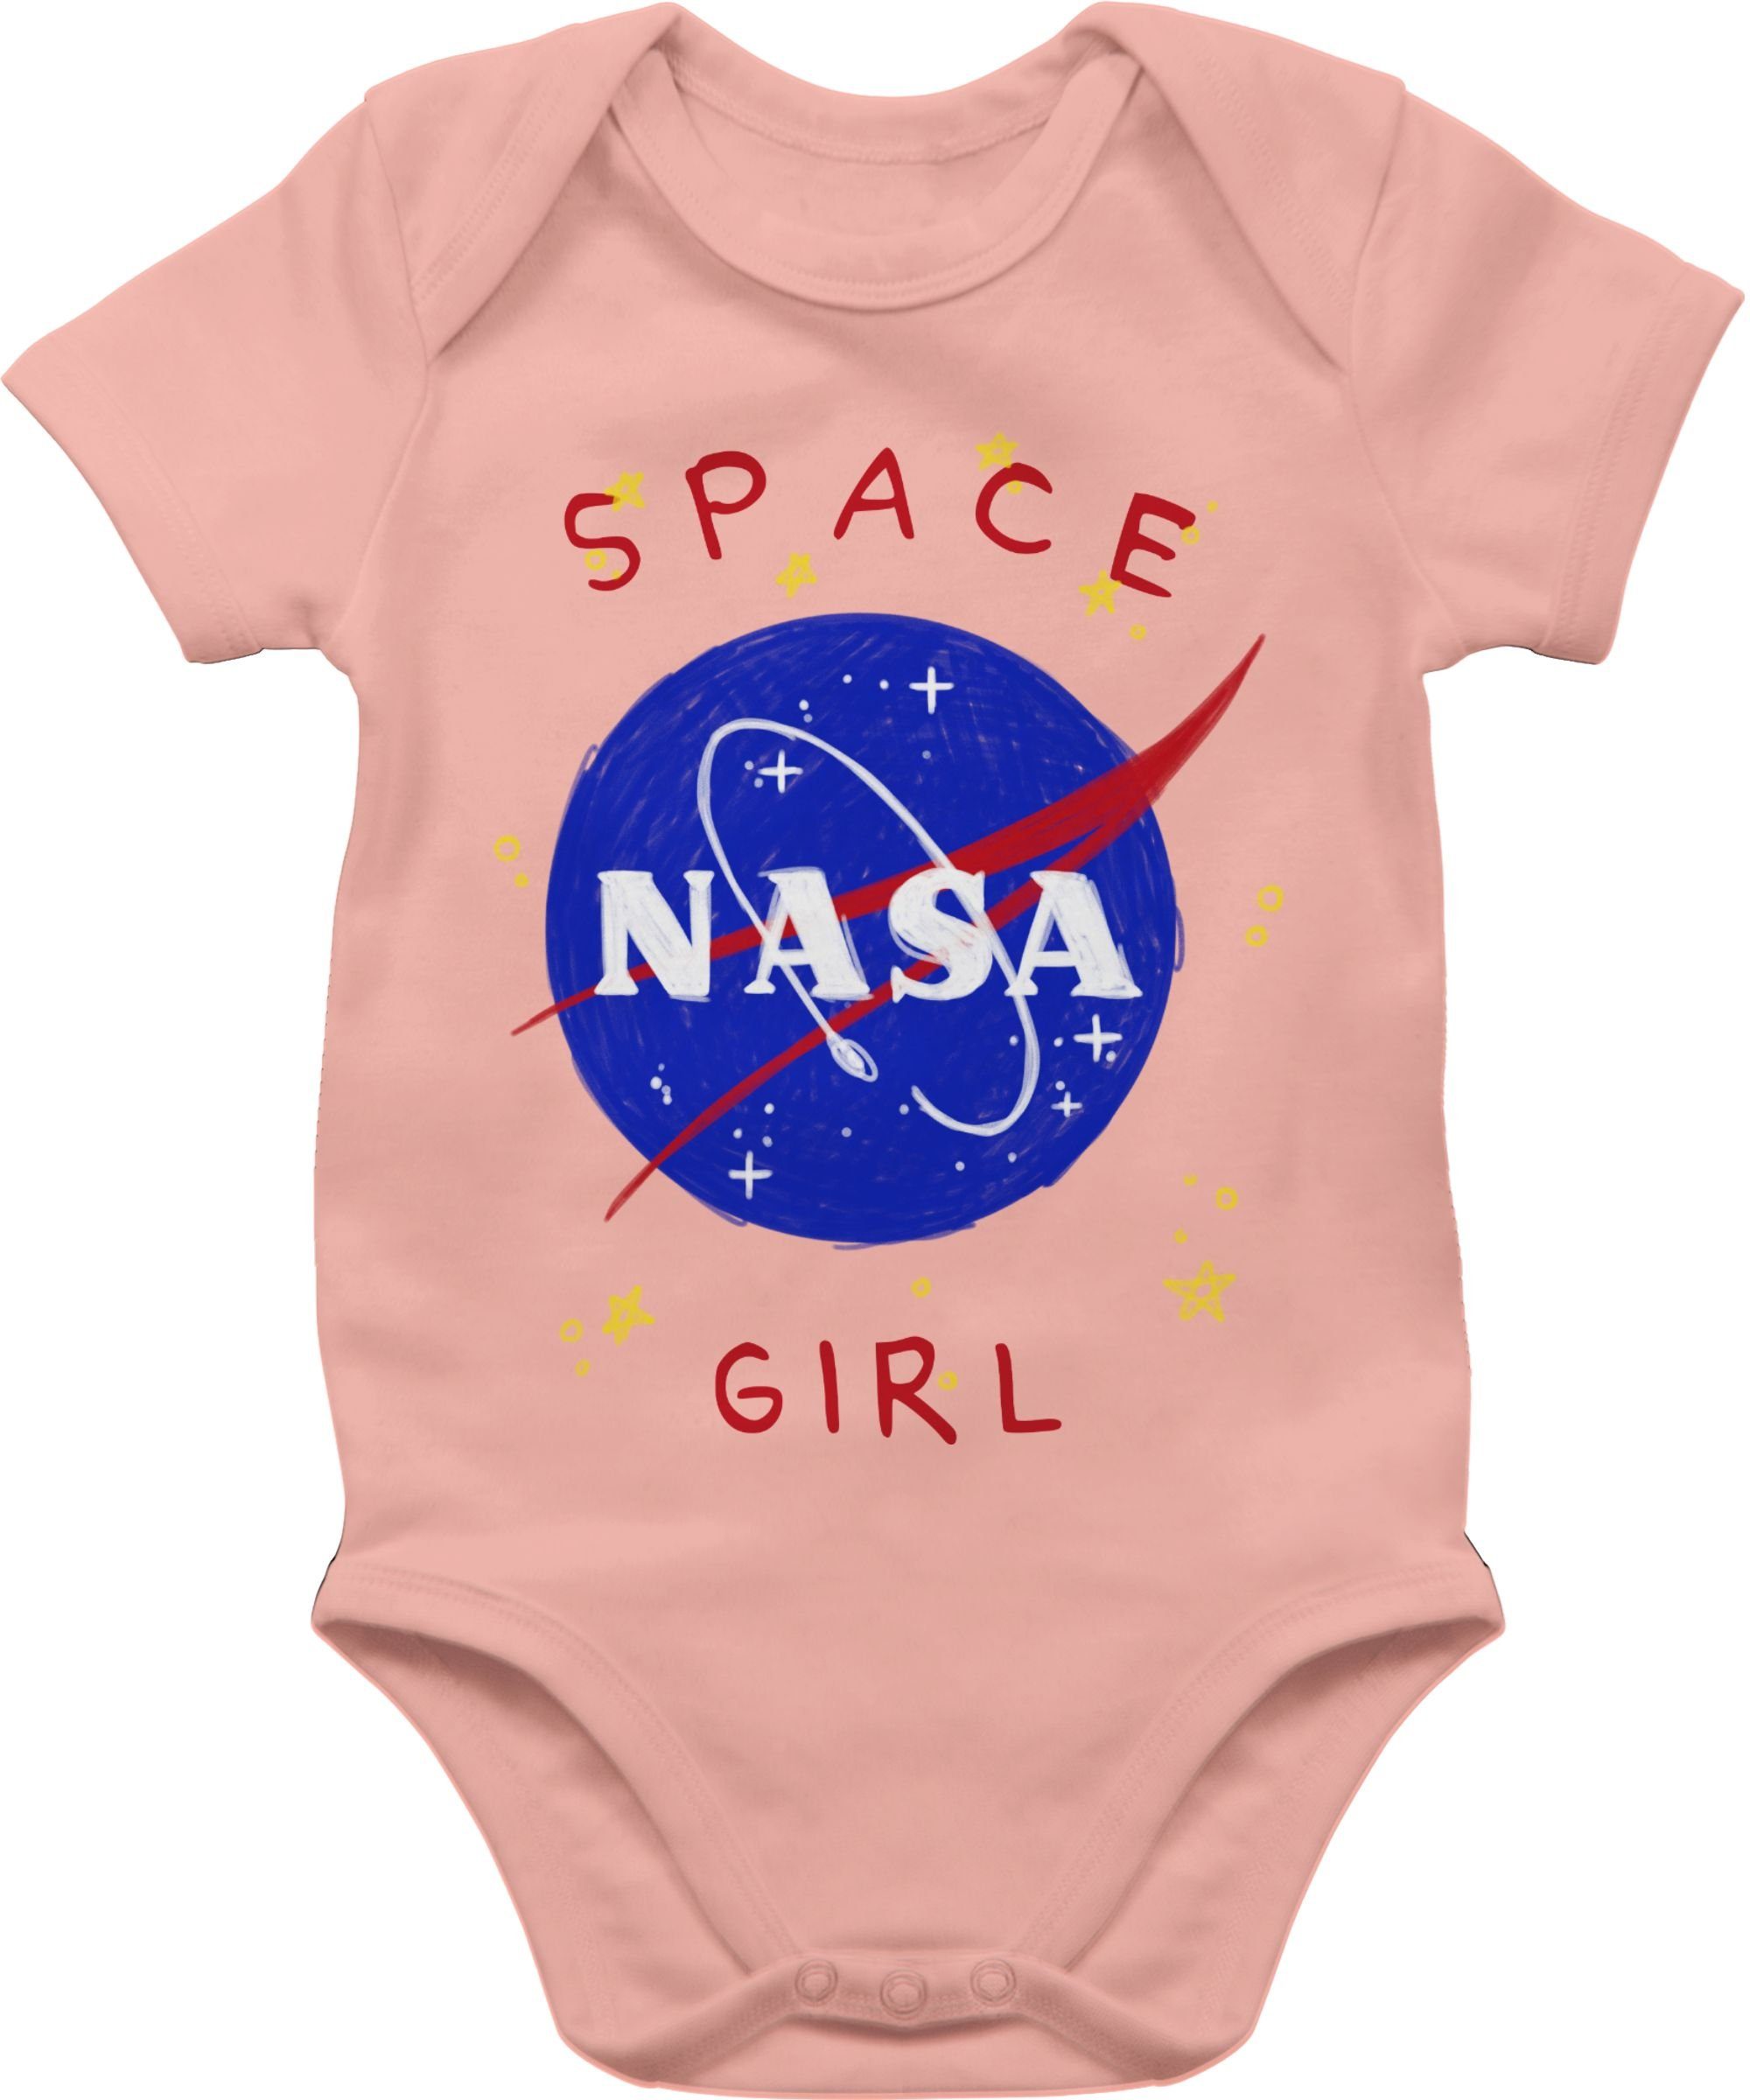 Shirtracer Shirtbody Space Girl Aktuelle Trends Baby 2 Babyrosa